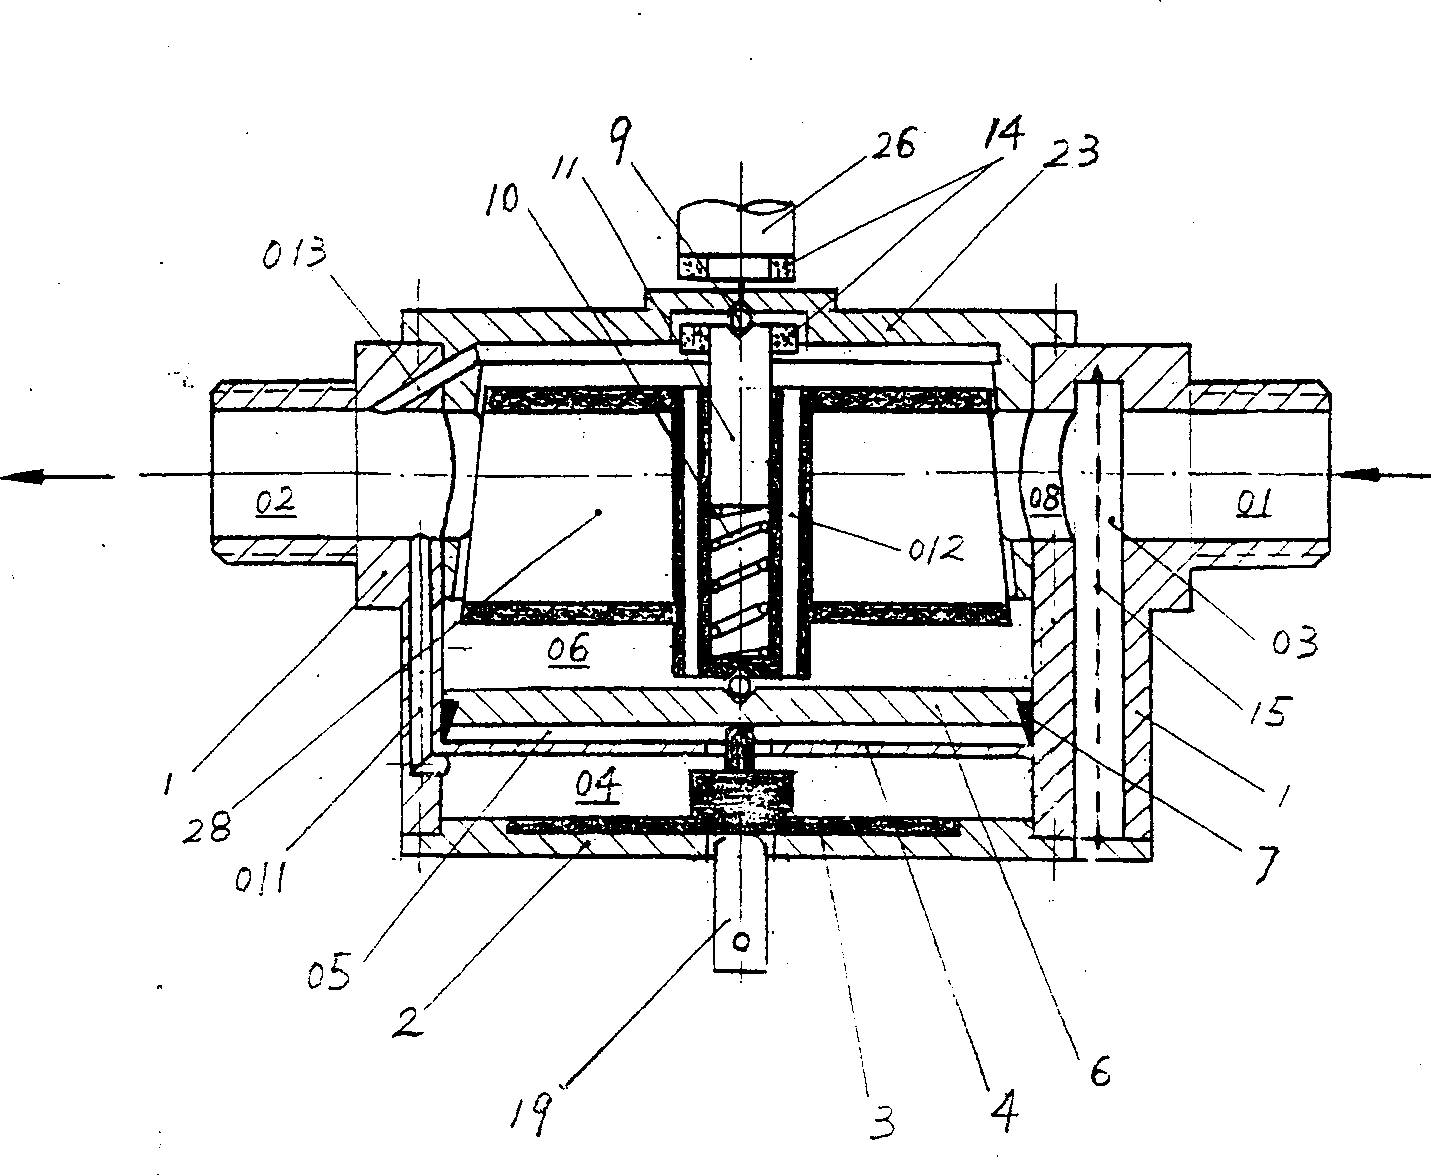 Pilot differential valve with metering function